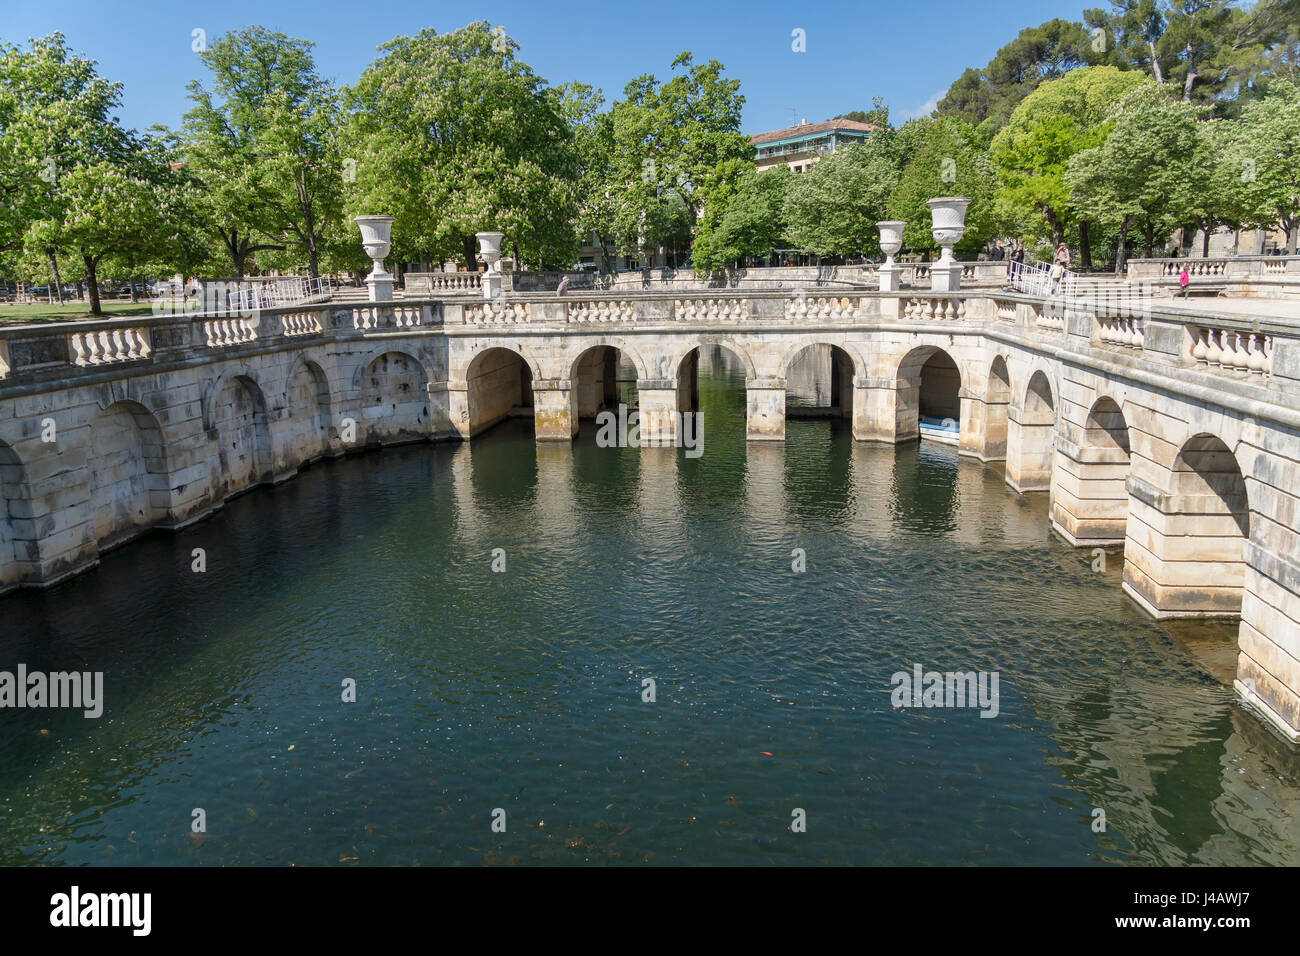 Jardin de la Fontaine, situated in Nimes France Stock Photo